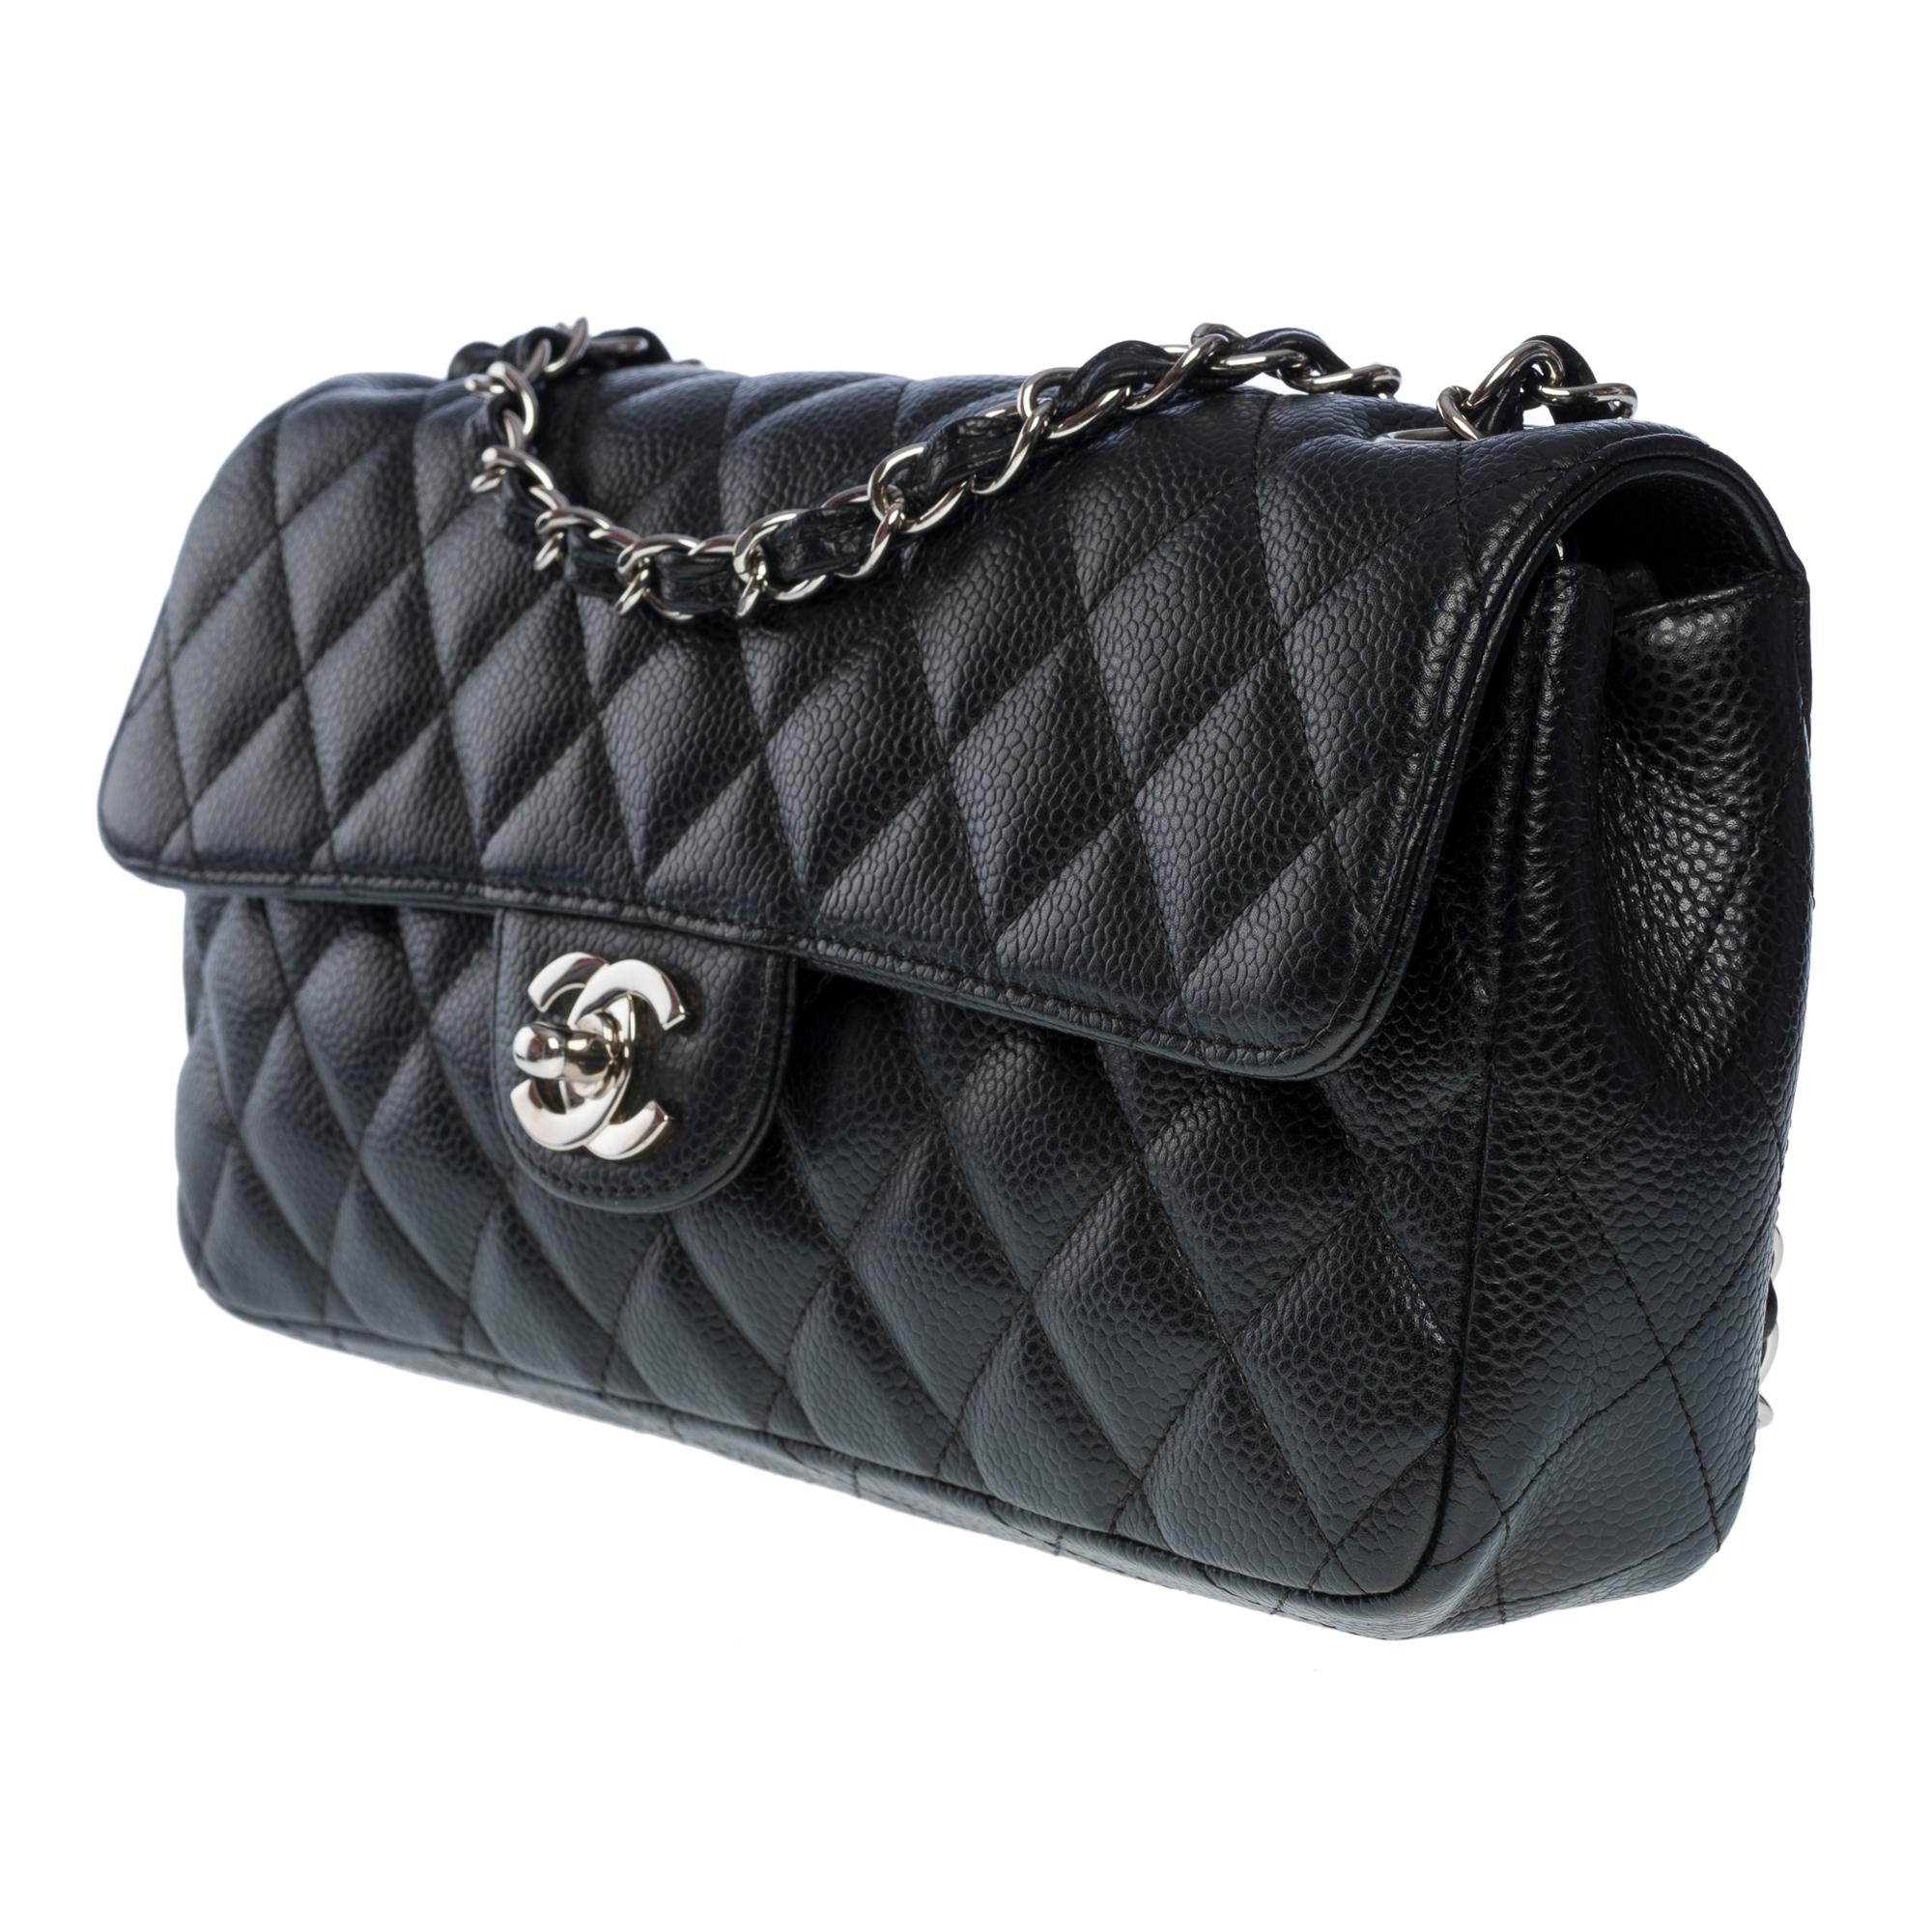 Women's Chanel Classic Baguette shoulder bag in black caviar quilted leather , SHW